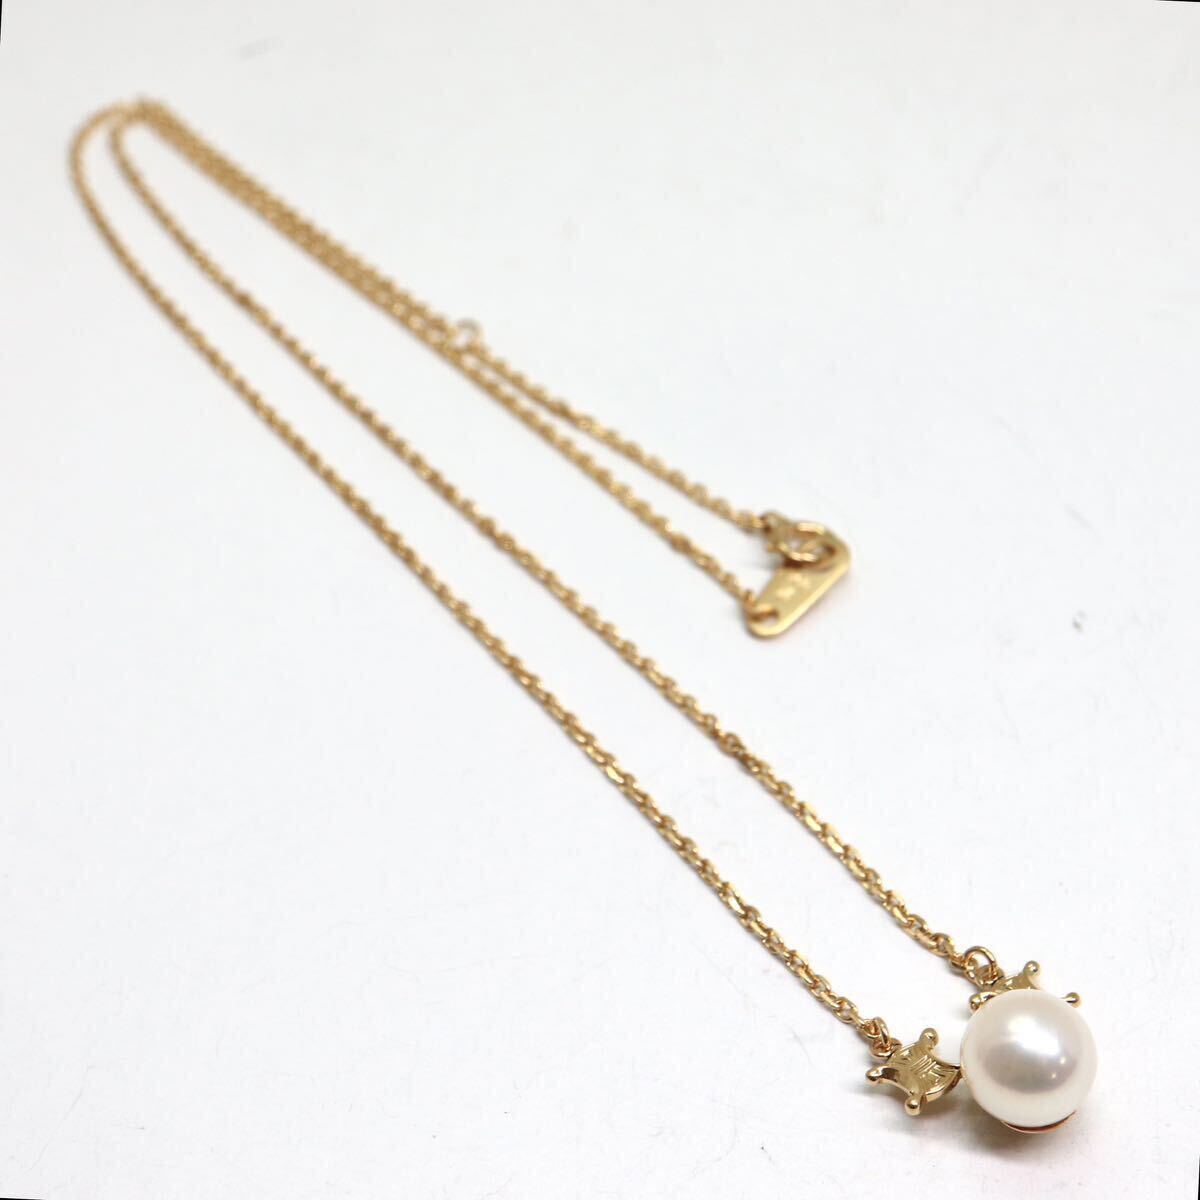 CELINE(セリーヌ)箱付き!!《K18(750) アコヤ本真珠ネックレス》A 約3.0g 約40cm pearl パール necklace ジュエリー jewelry EB3/EB3の画像7